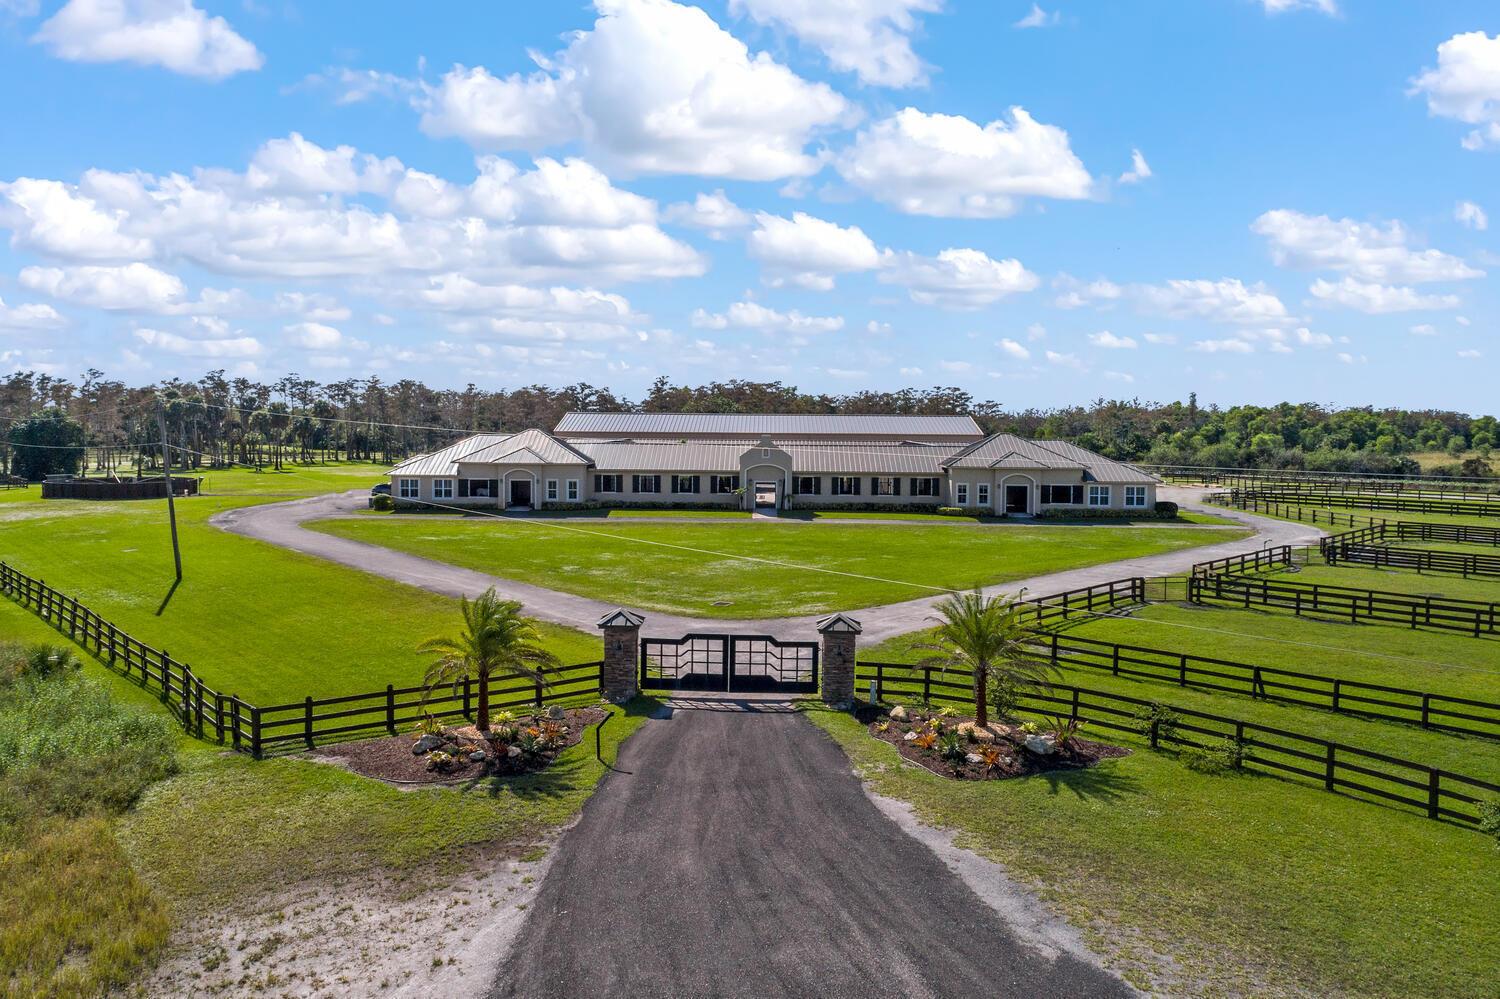 This 24-stall courtyard-style stable & training facility offers total flexibility of use. Situated on 14 acres, the stable's mirror image layout allows perfect privacy for your horses, separate from boarders.  There are 2 tack & 2 feed rooms, 2 wash-rack areas, and 2 apartments, totaling 6Br.  Horses relax in this Florida open-air design with tranquil views to the inner-patio sanctuary.  There is a 4Br/2Bth apt.  on the East end of the stable and a 2Br/2Bth apt. on the West end.  Both have a primary bedroom w/ in suite bathrooms. Adjacent to the stable is the covered arena (199' x 67') with GGT footing & attached storage garage (61' x 31' totaling 1,891 sq. ft.), a 4-horse exercise walker & 12 grass paddocks. There is plenty of room for an outdoor arena & to build your custom estate home!